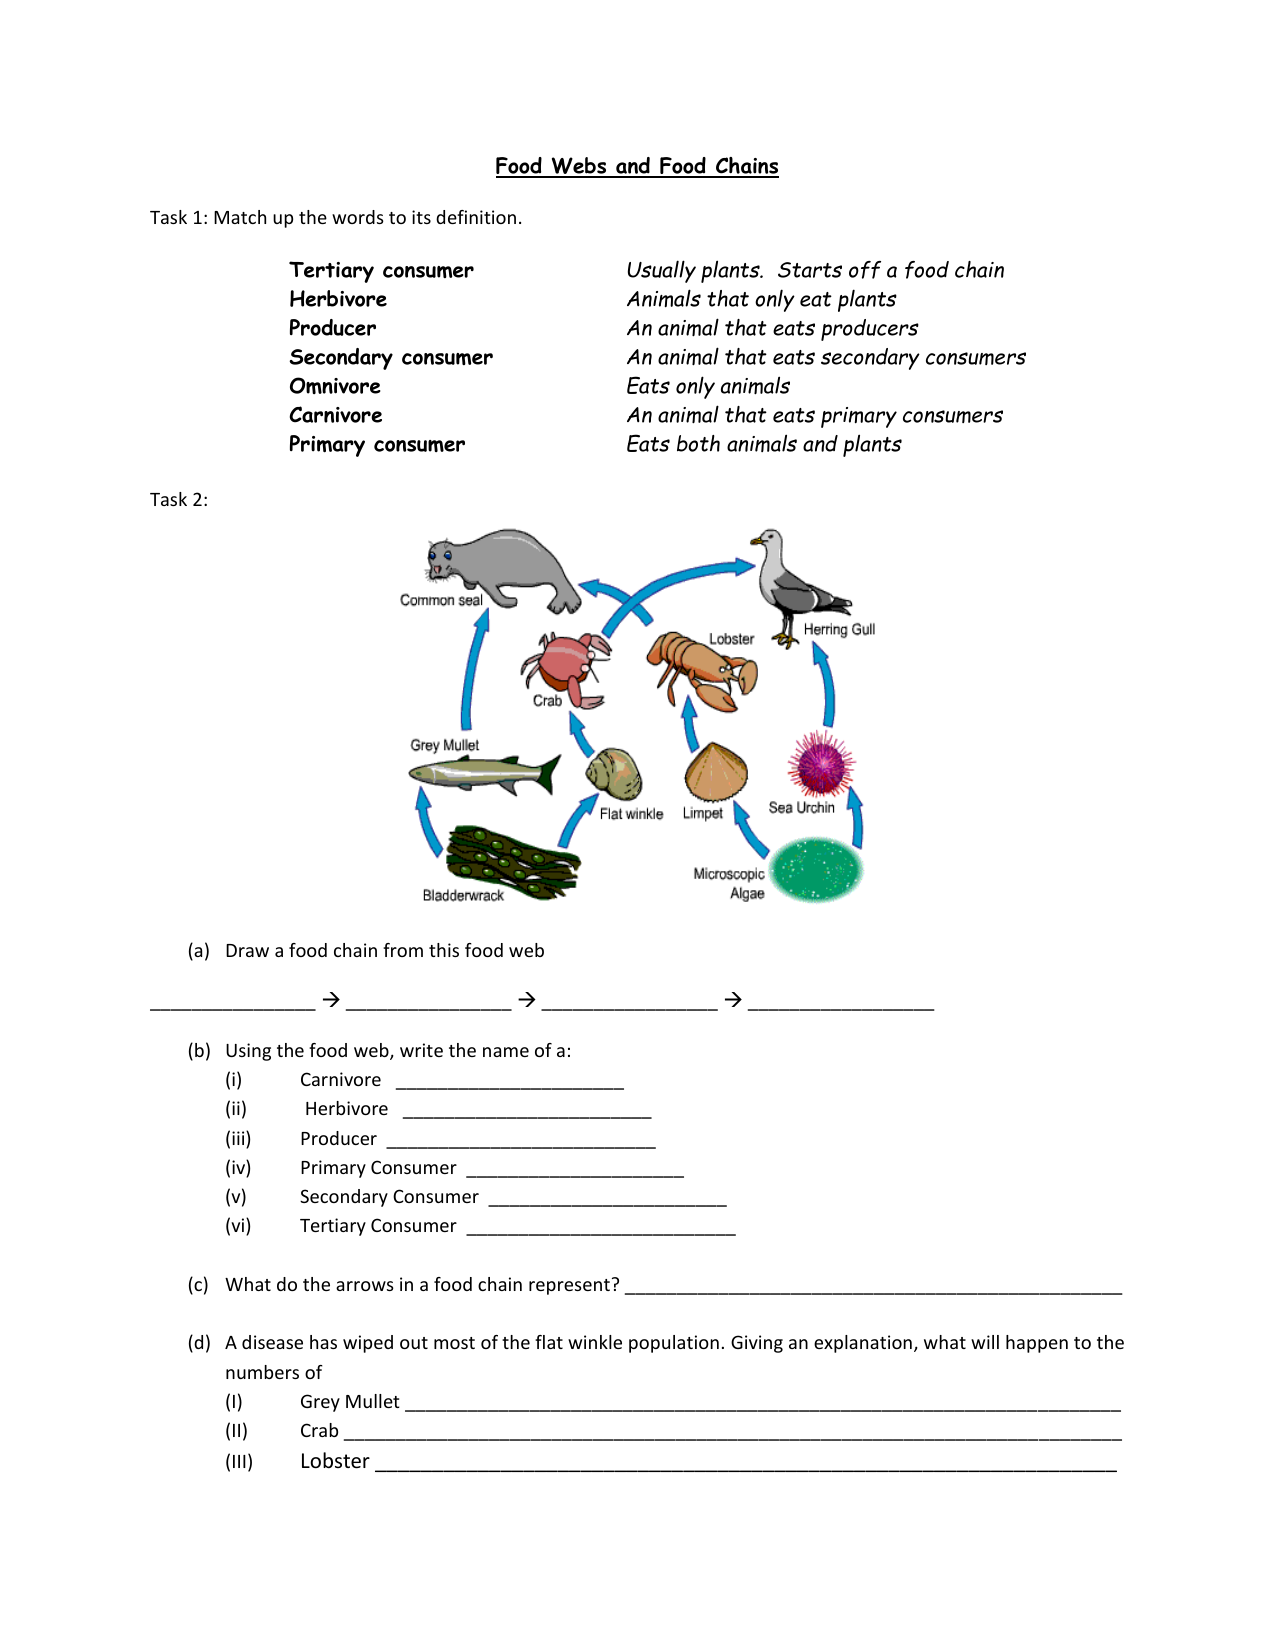 Food Chains and Webs worksheet